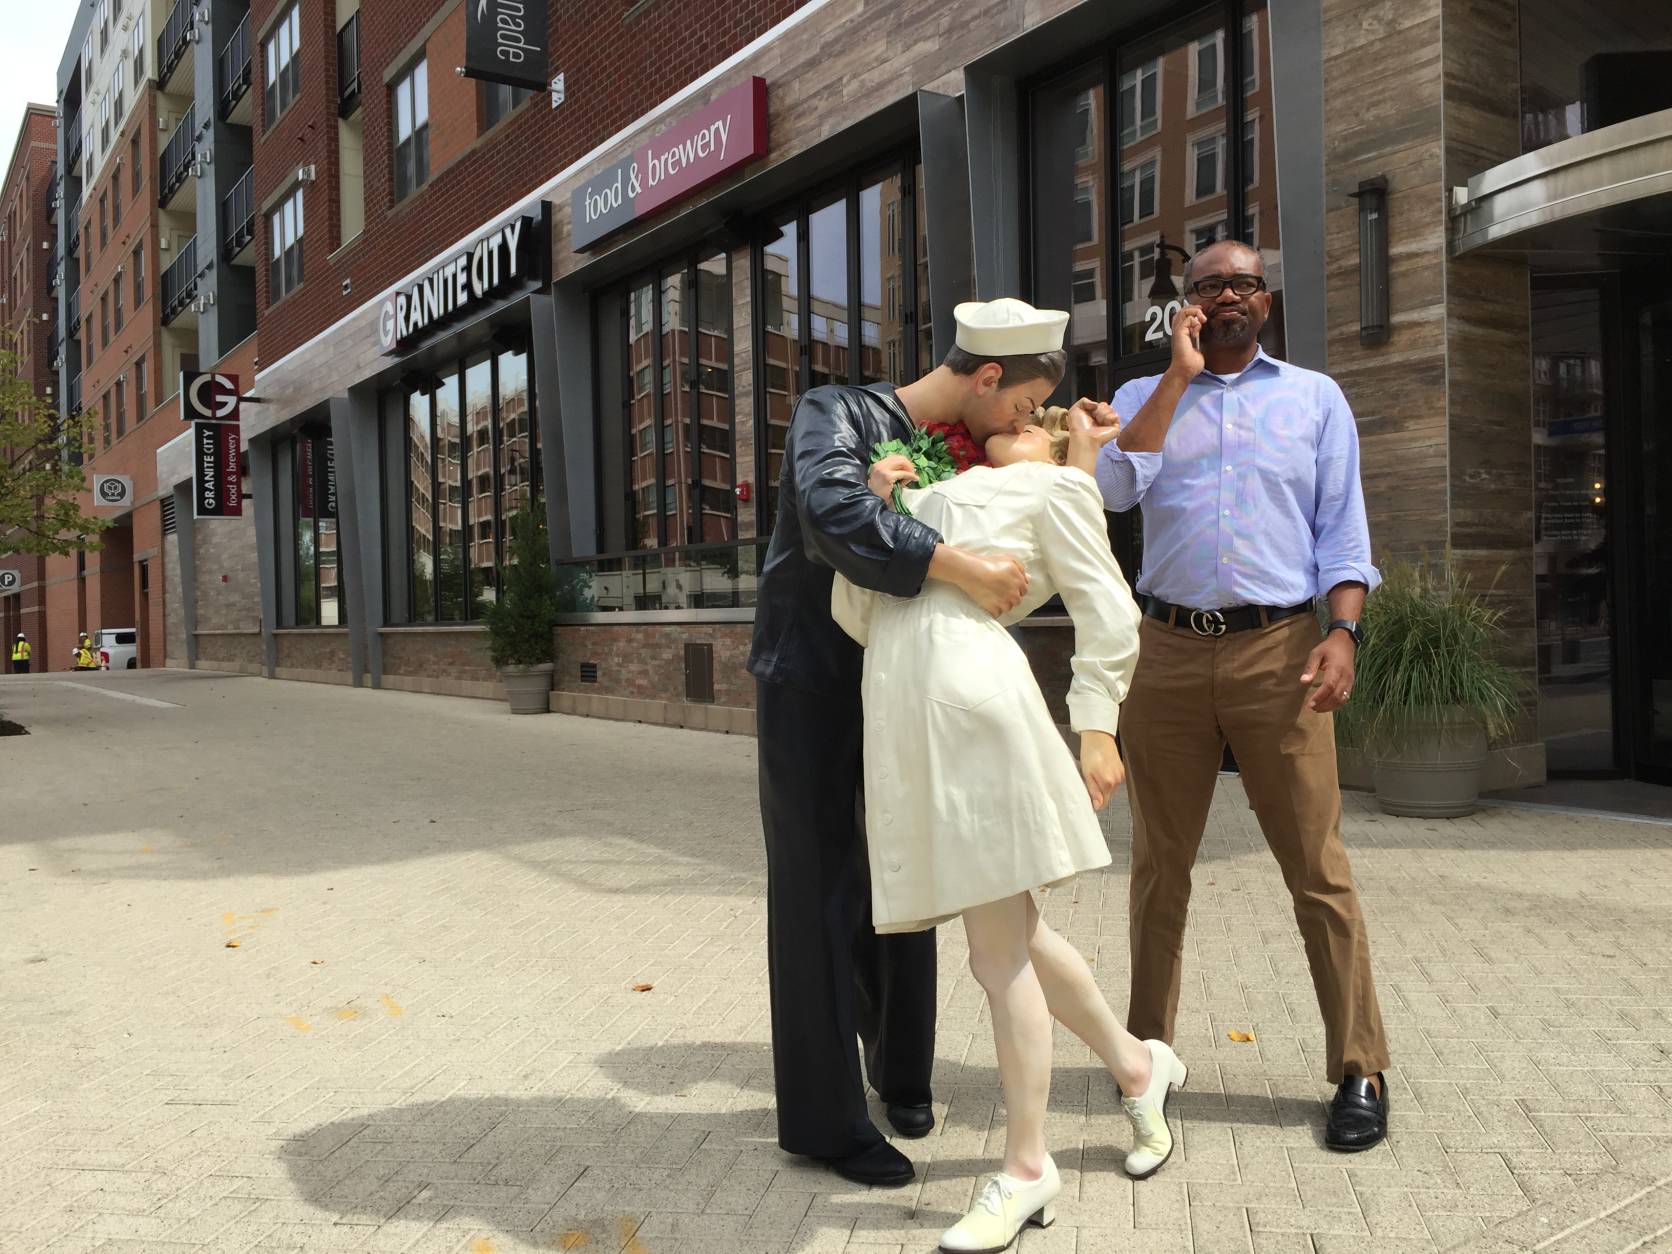 This statue on display at National Harbor depicts an iconic Times Square photo taken Aug. 14, 1945 upon news of the Japanese surrender that ended World War II. (WTOP/Kristi King)